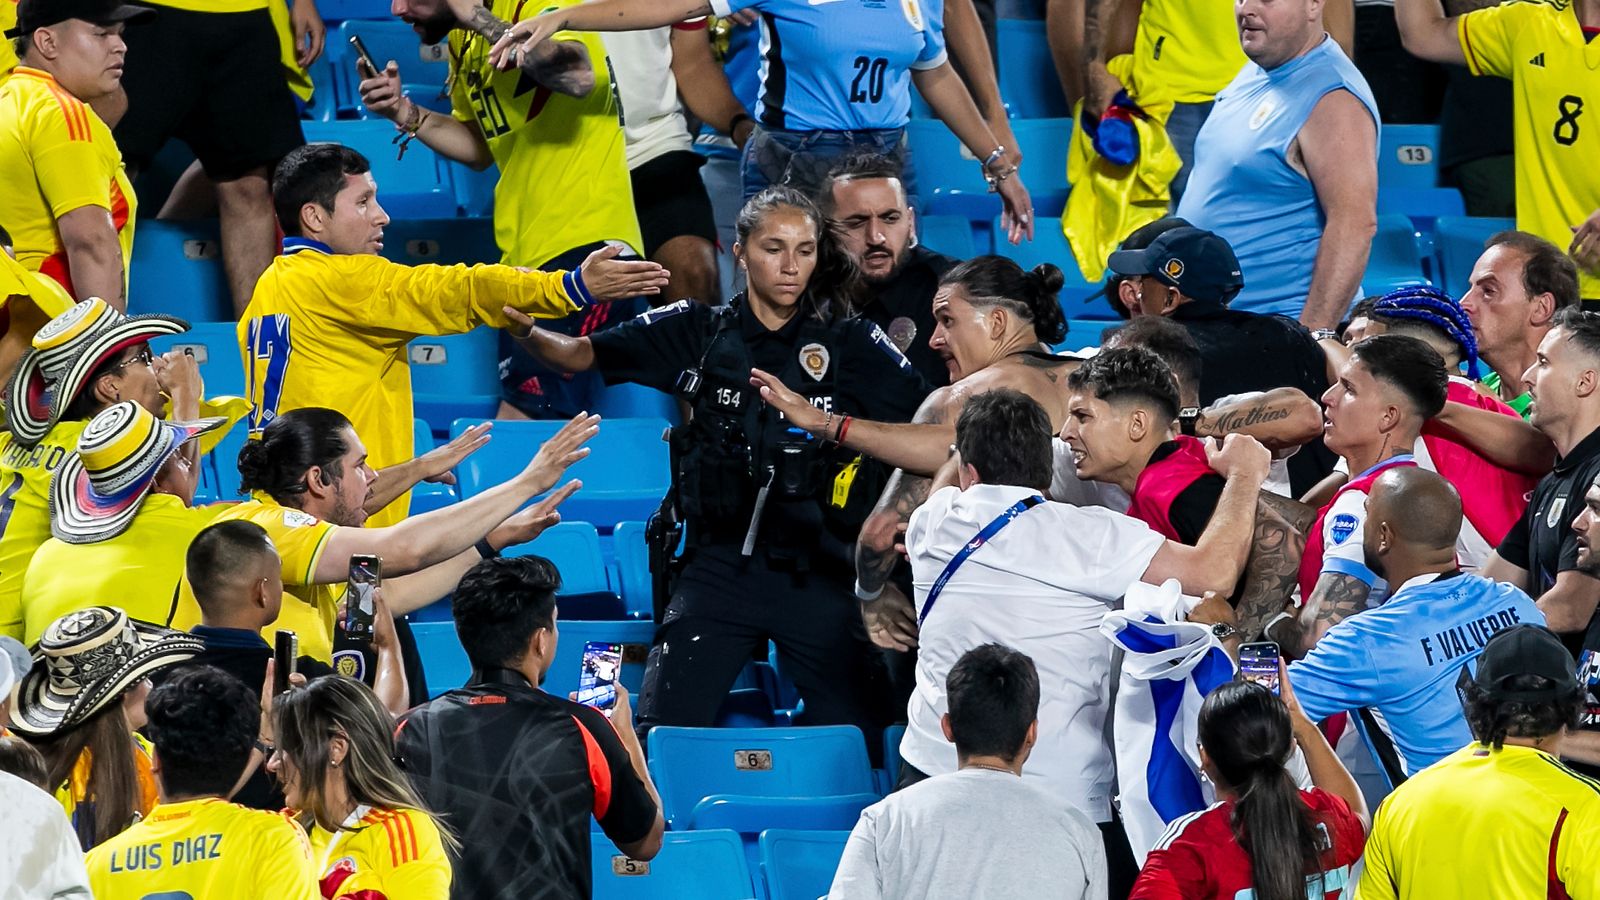 Uruguay players stepped into the stands to deal with an altercation with Colombia supporters